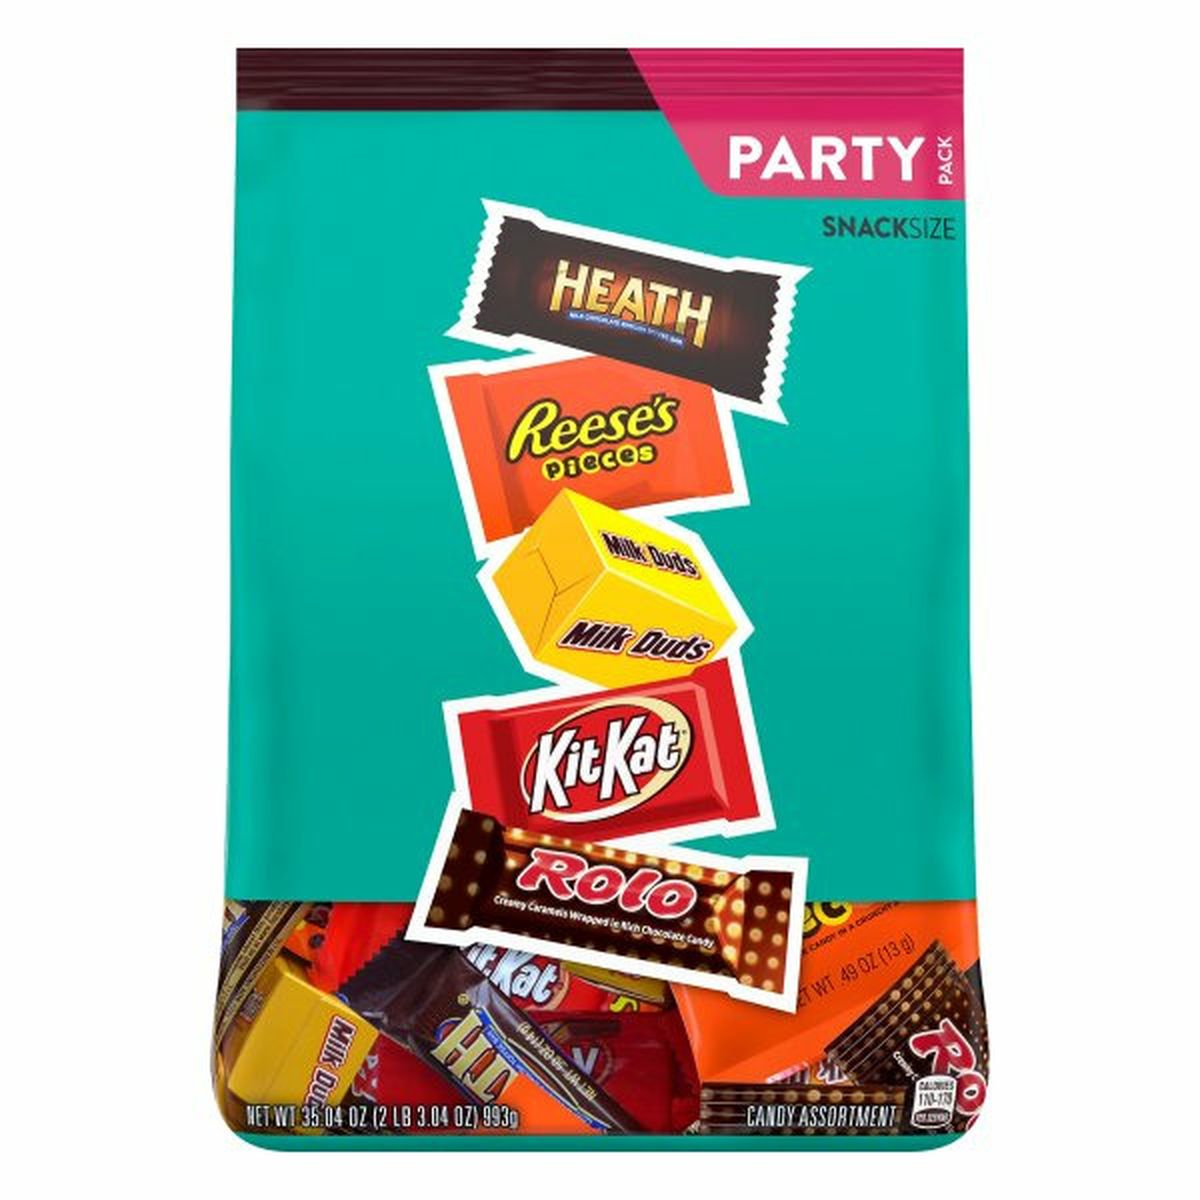 Calories in Hershey's Candy Assortment, Snack Size, Party Pack